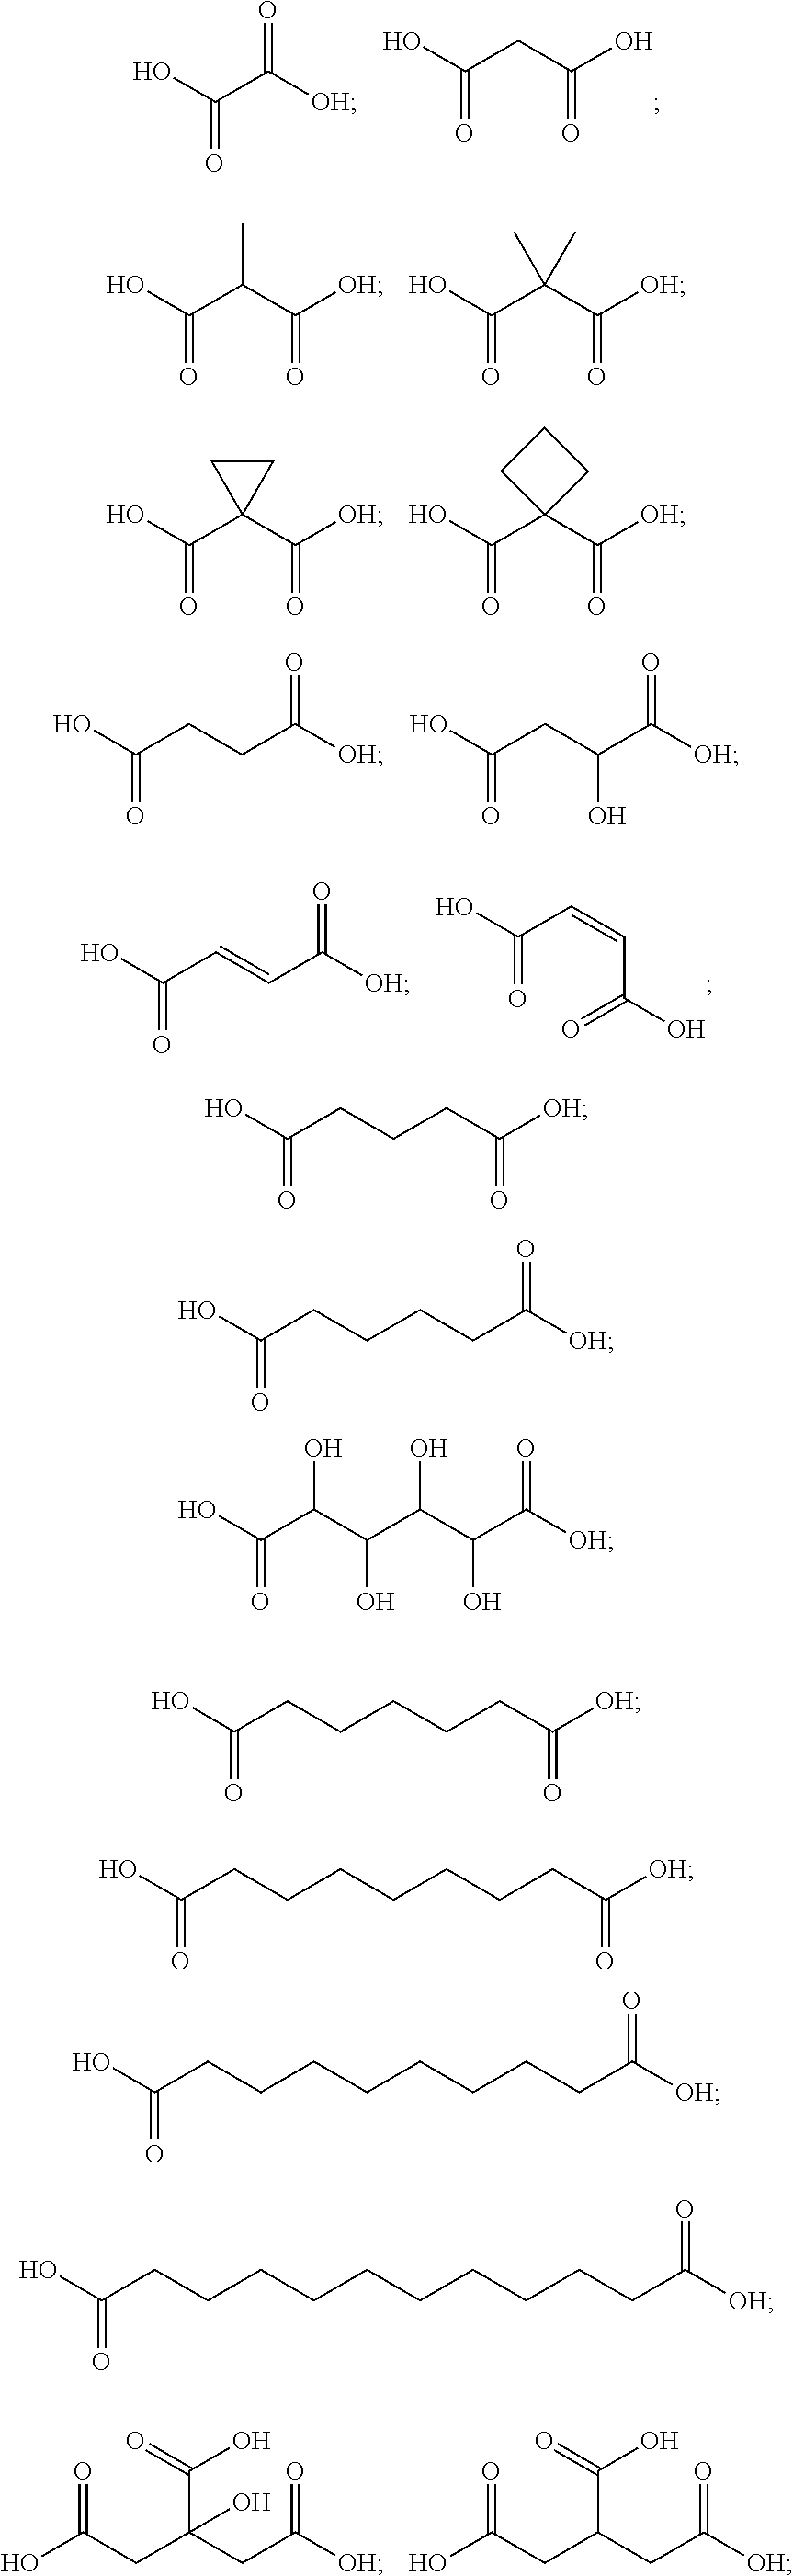 Polycarbonate polyol compositions and methods